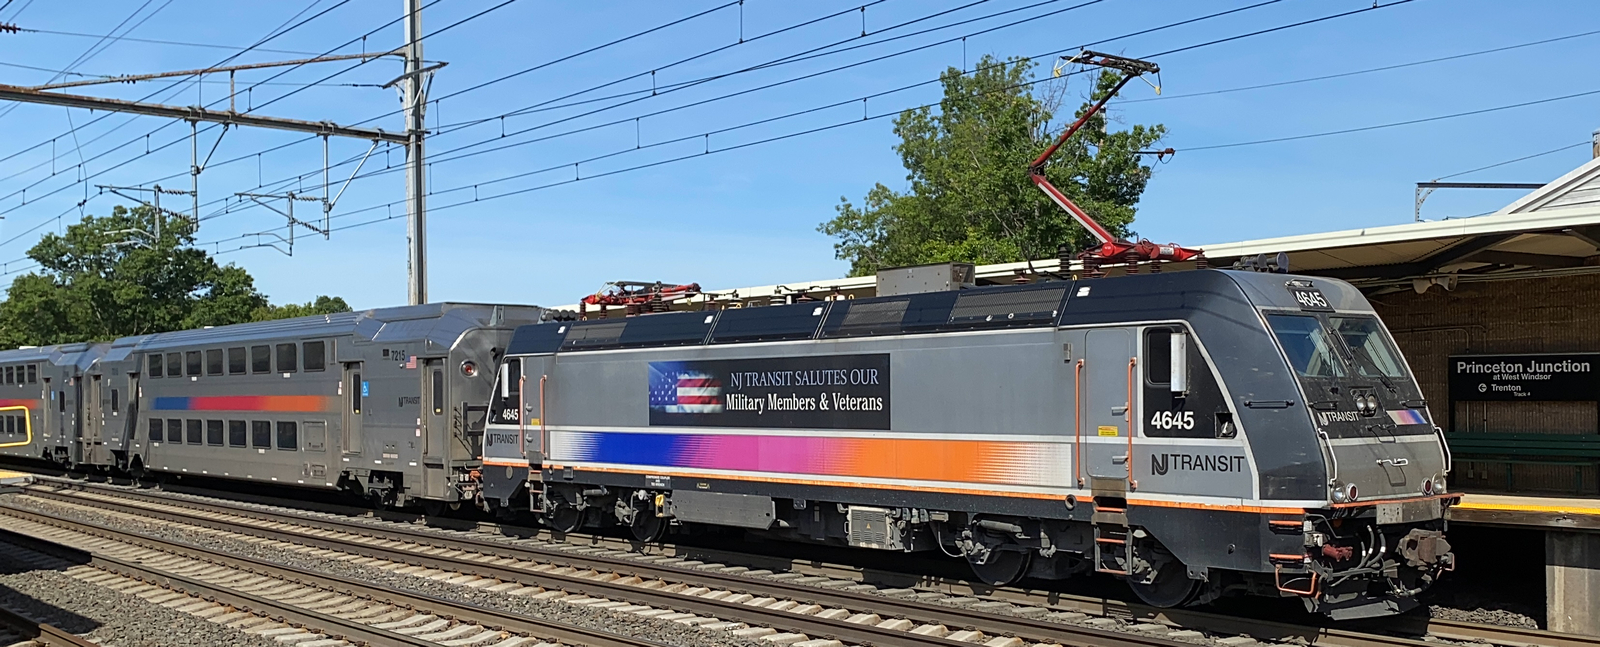 ALP-46A No. 4645 in June 2021 at Princeton Junction station, New Jersey